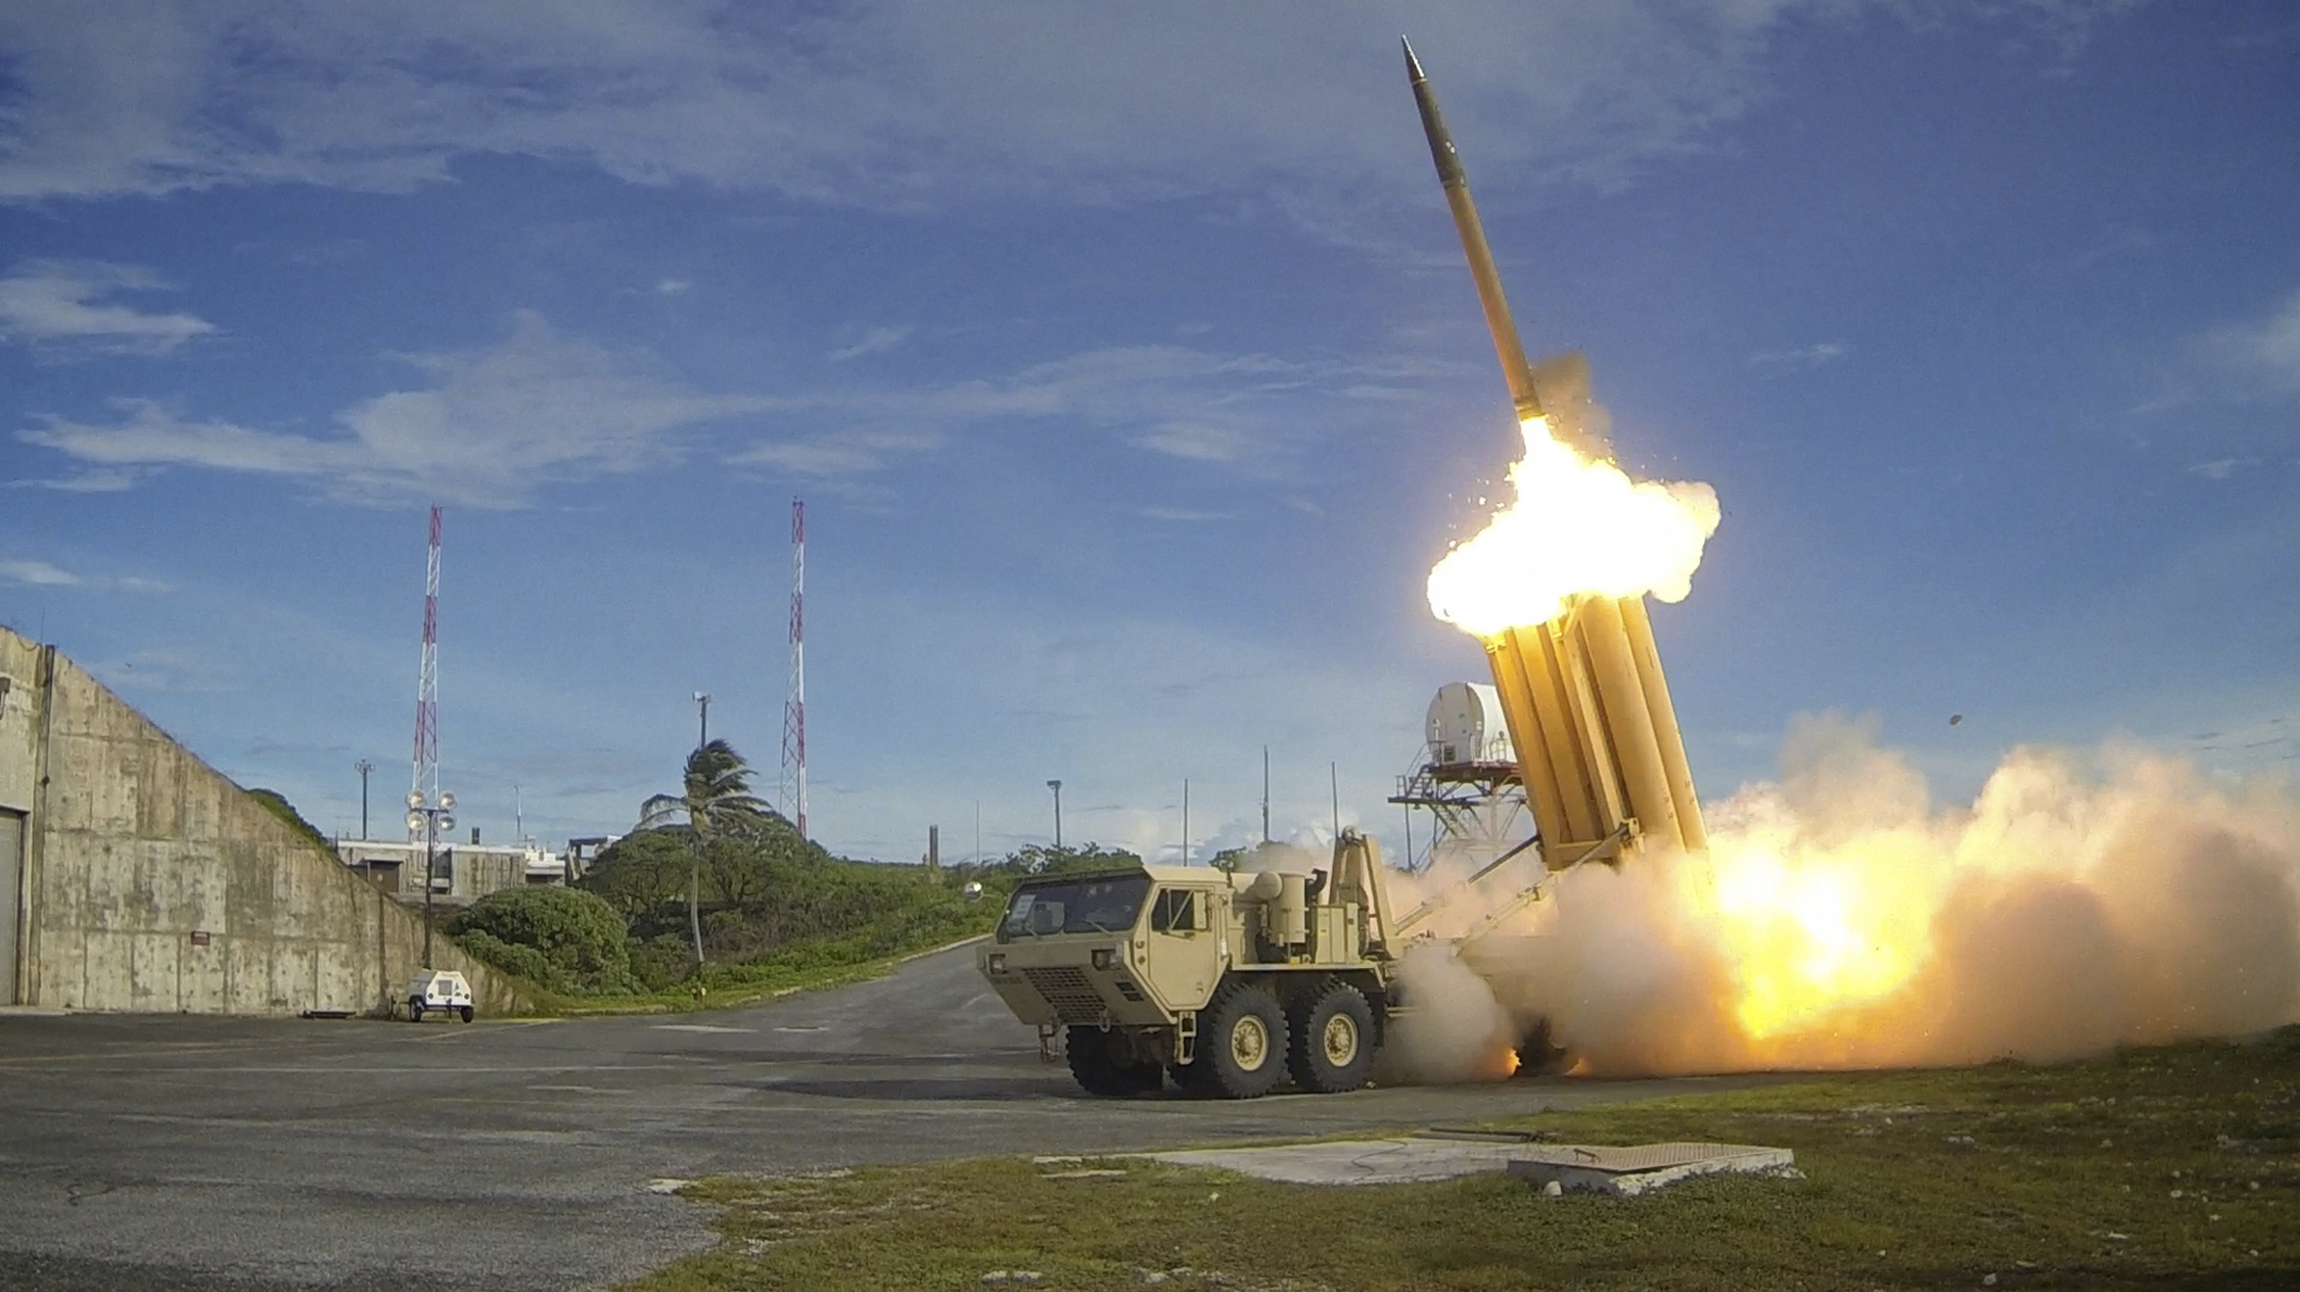 U.S to deploy anti-missile system in South Korea 'as soon as possible'